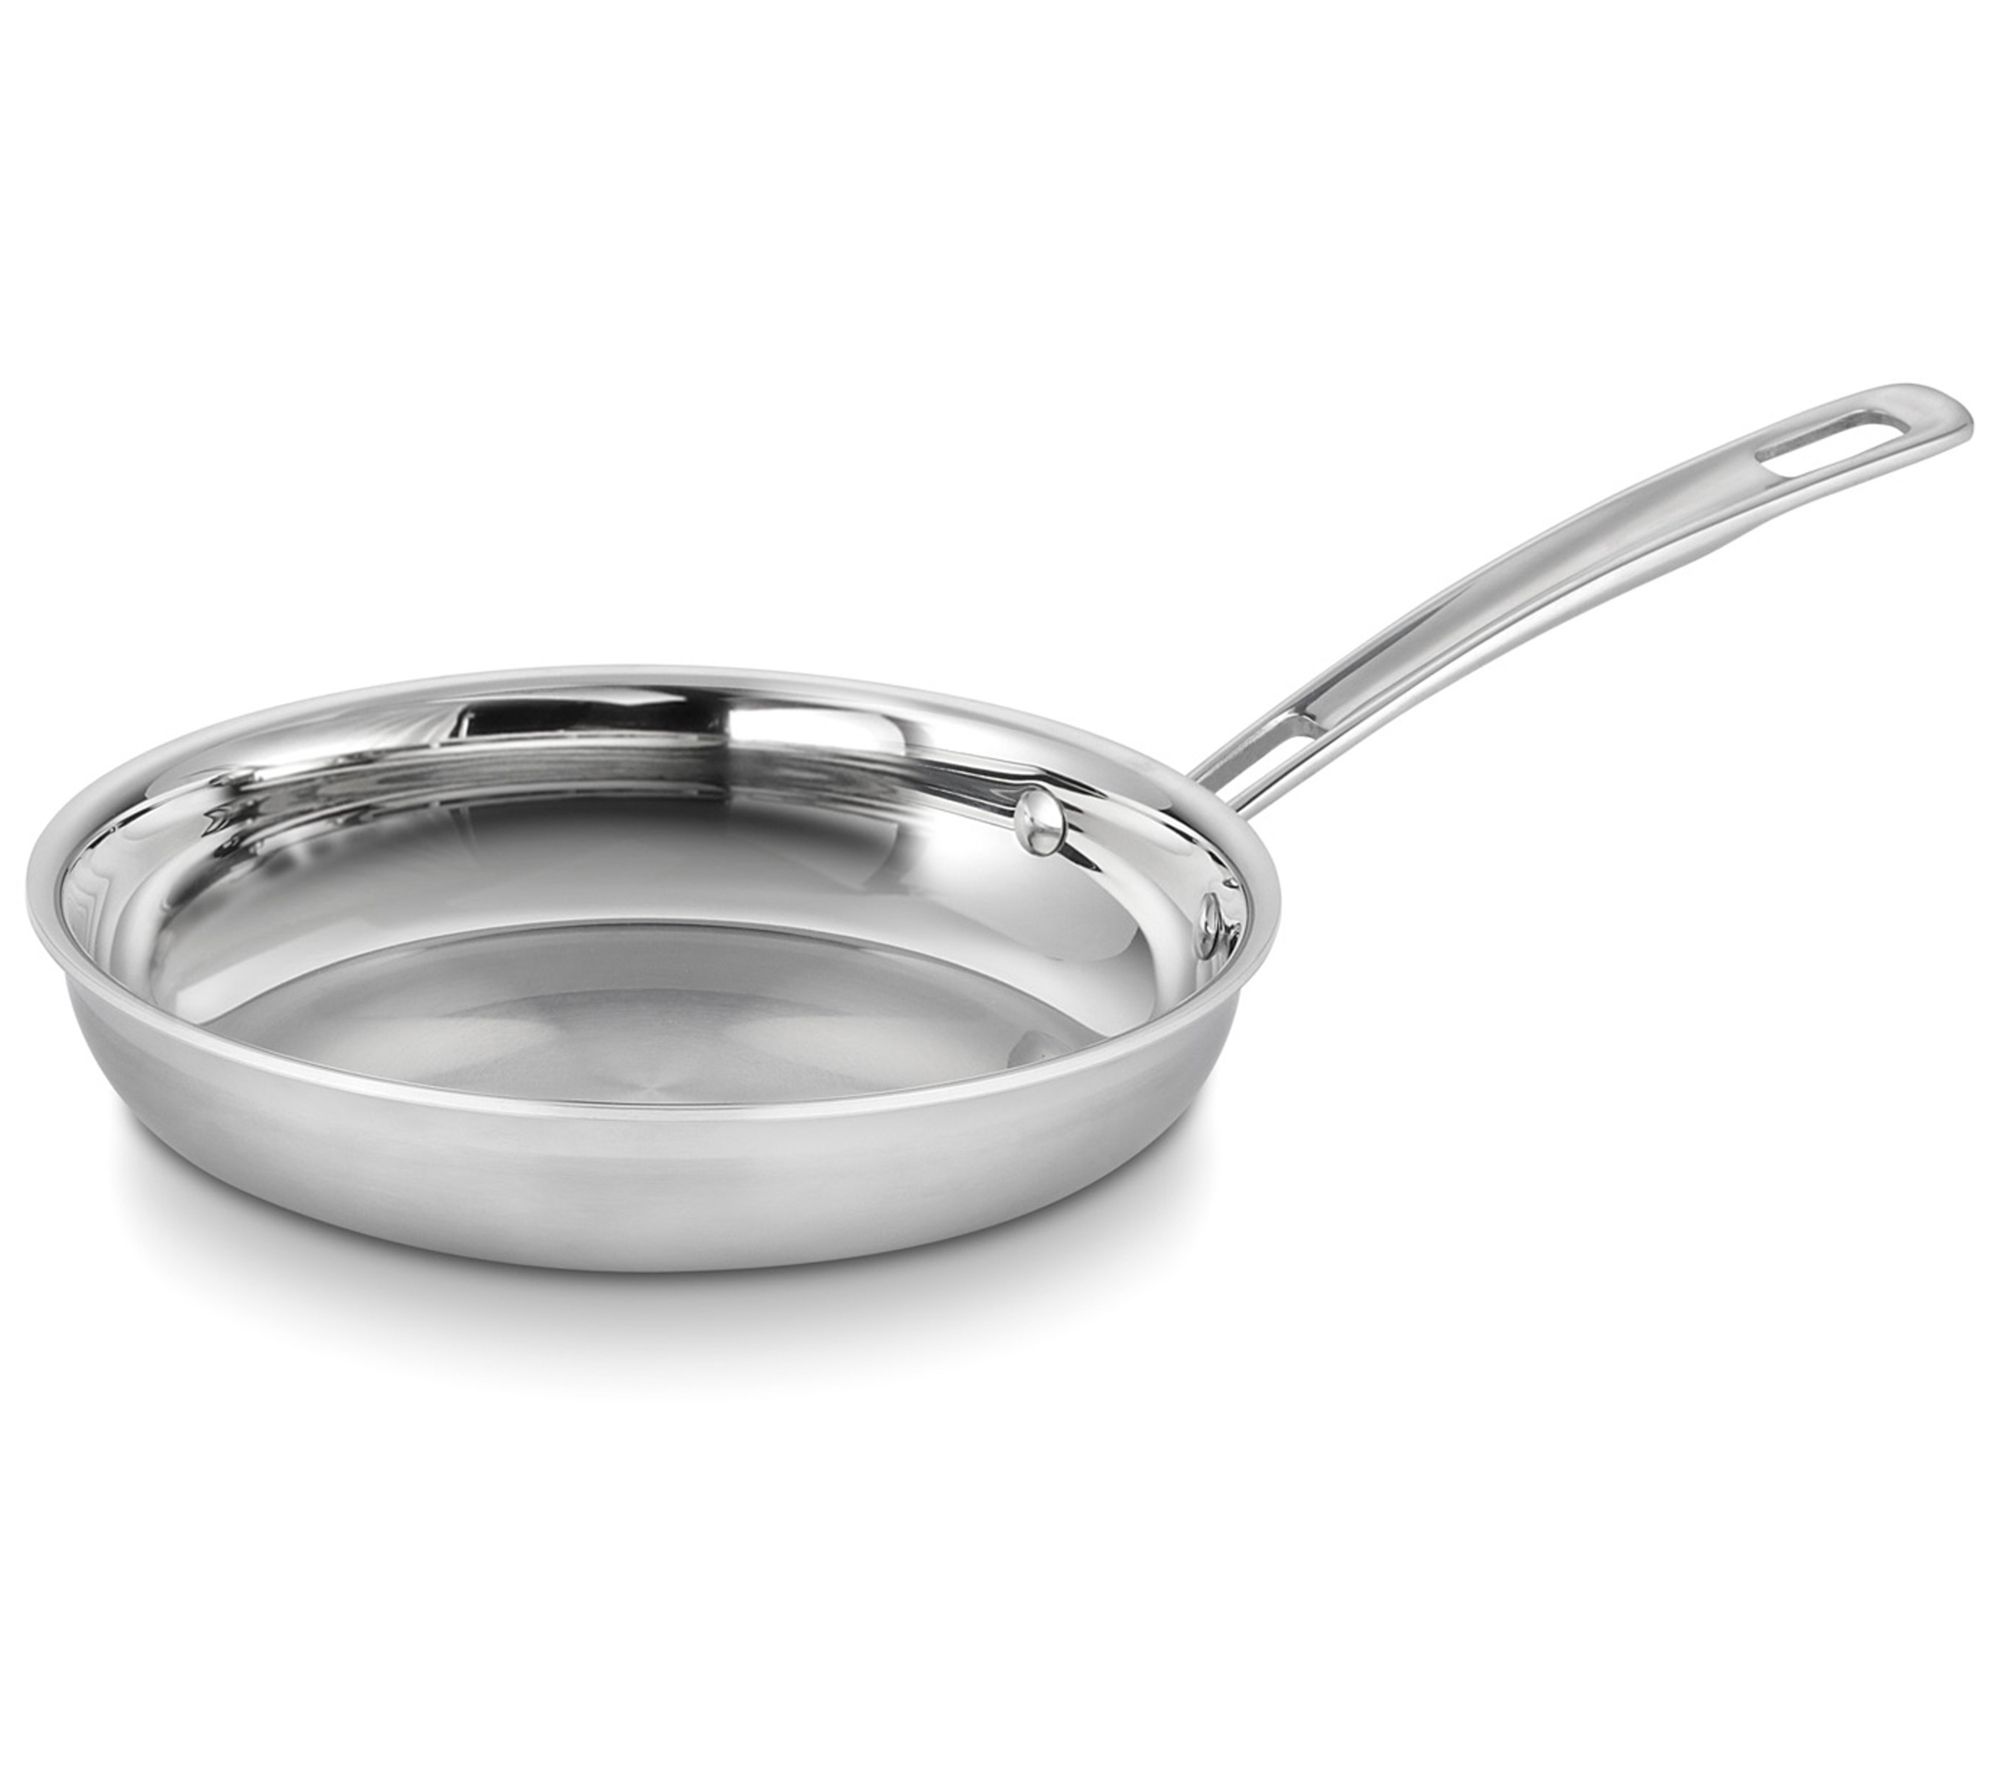 Stainless-steel cookware: The Cuisinart Multiclad Pro set just